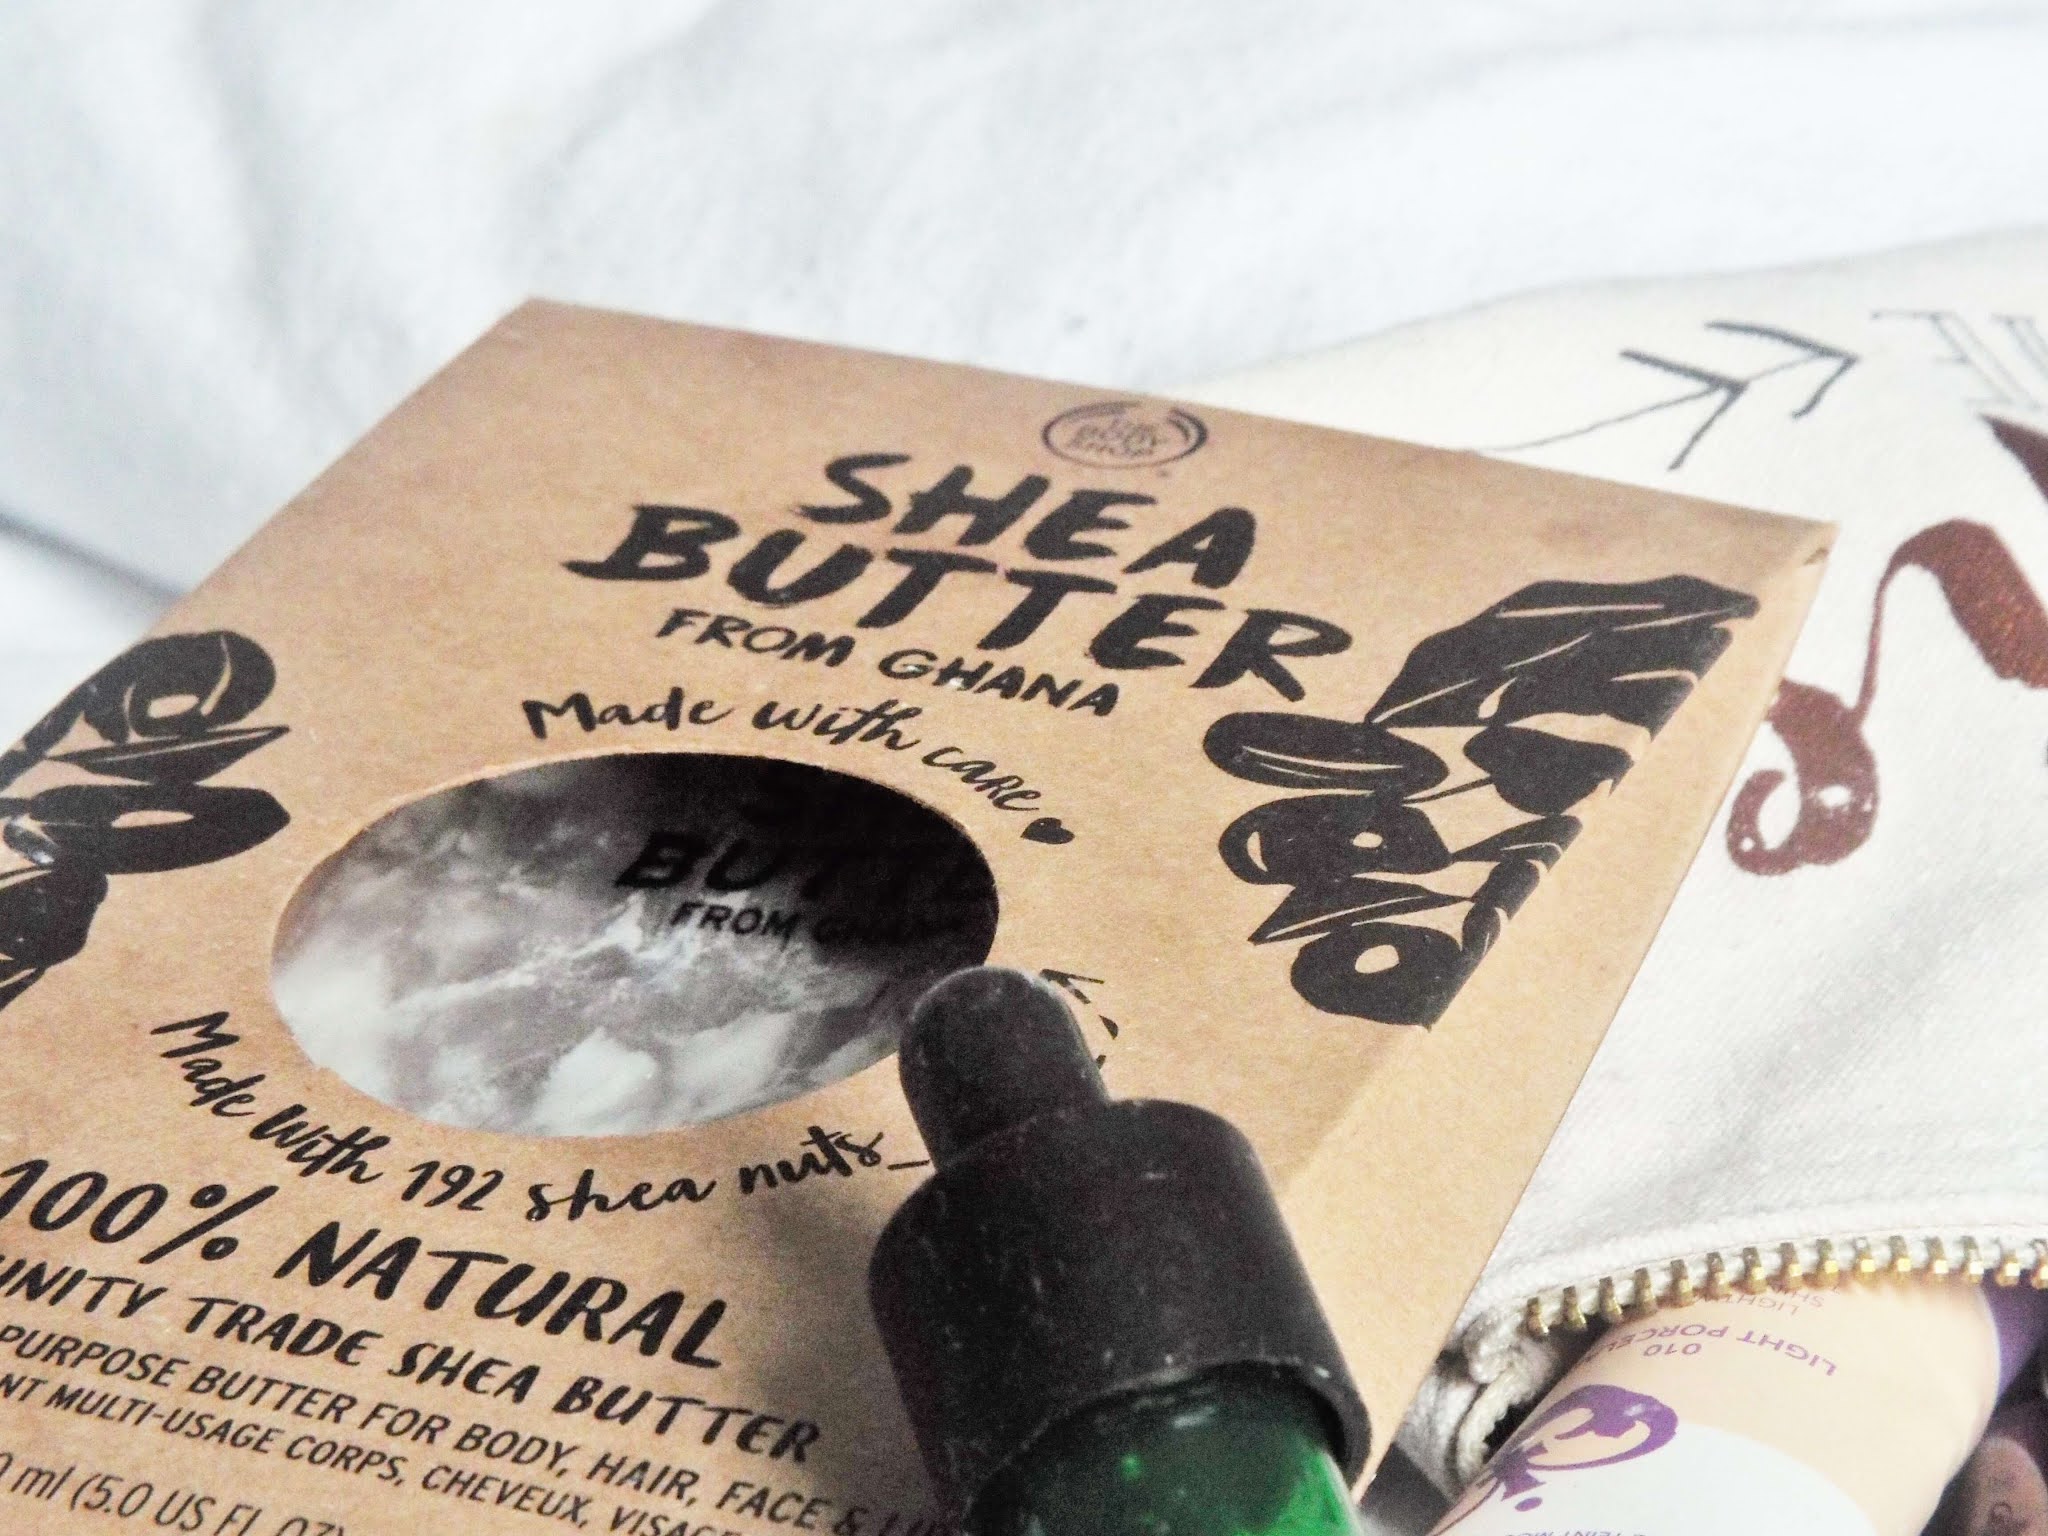 The Body Shop 100% Natural Community Trade Shea Butter, in a clear plastic pouch, encased in thin, brown card box, with hints to beauty recipes you can make with the product on the back..